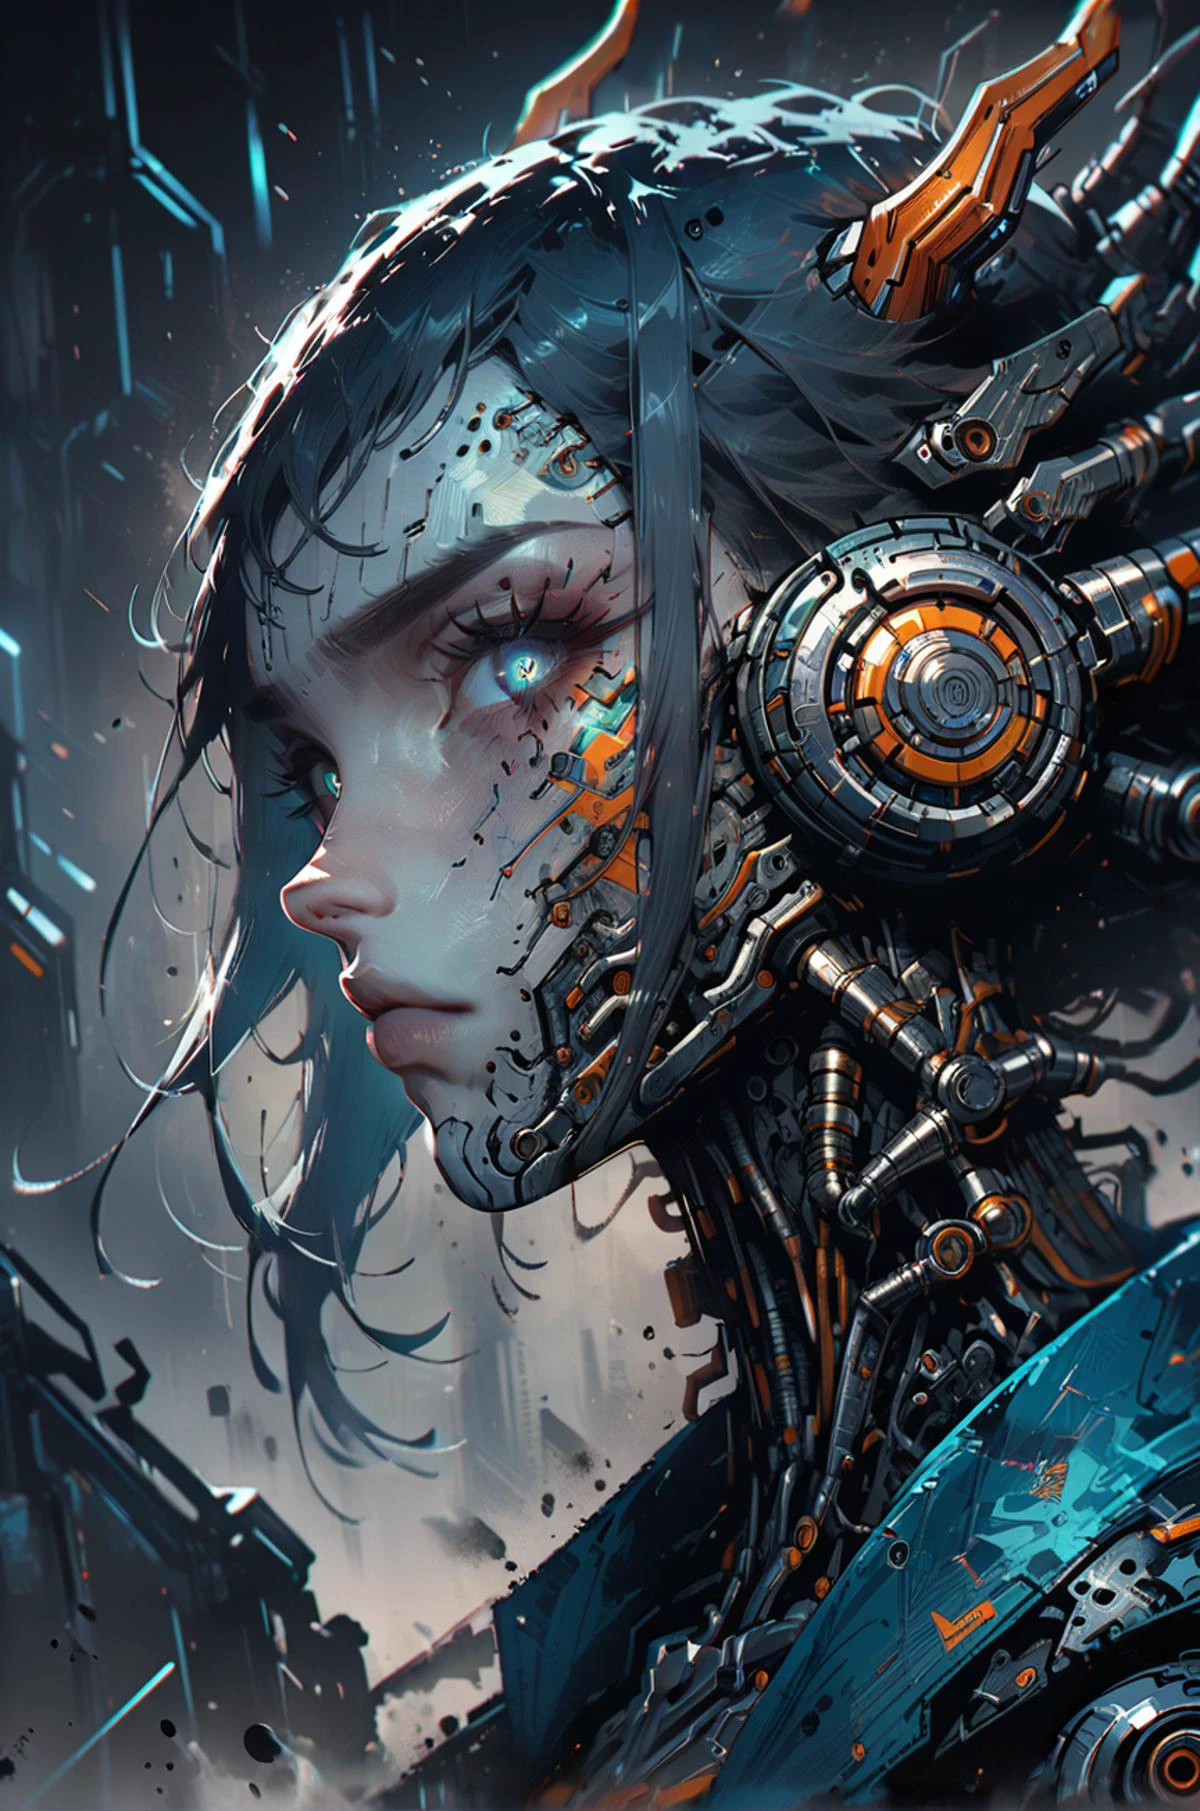 biomechanical cyberpunk one girl, haughty expression, raised chin, bob, horns, selective blue, cyberpunk, looking at viewer, heavy tones, detail, dark background, dramatic, front view . cybernetics, human-machine fusion, dystopian, organic meets artificial, dark, intricate, highly detailed